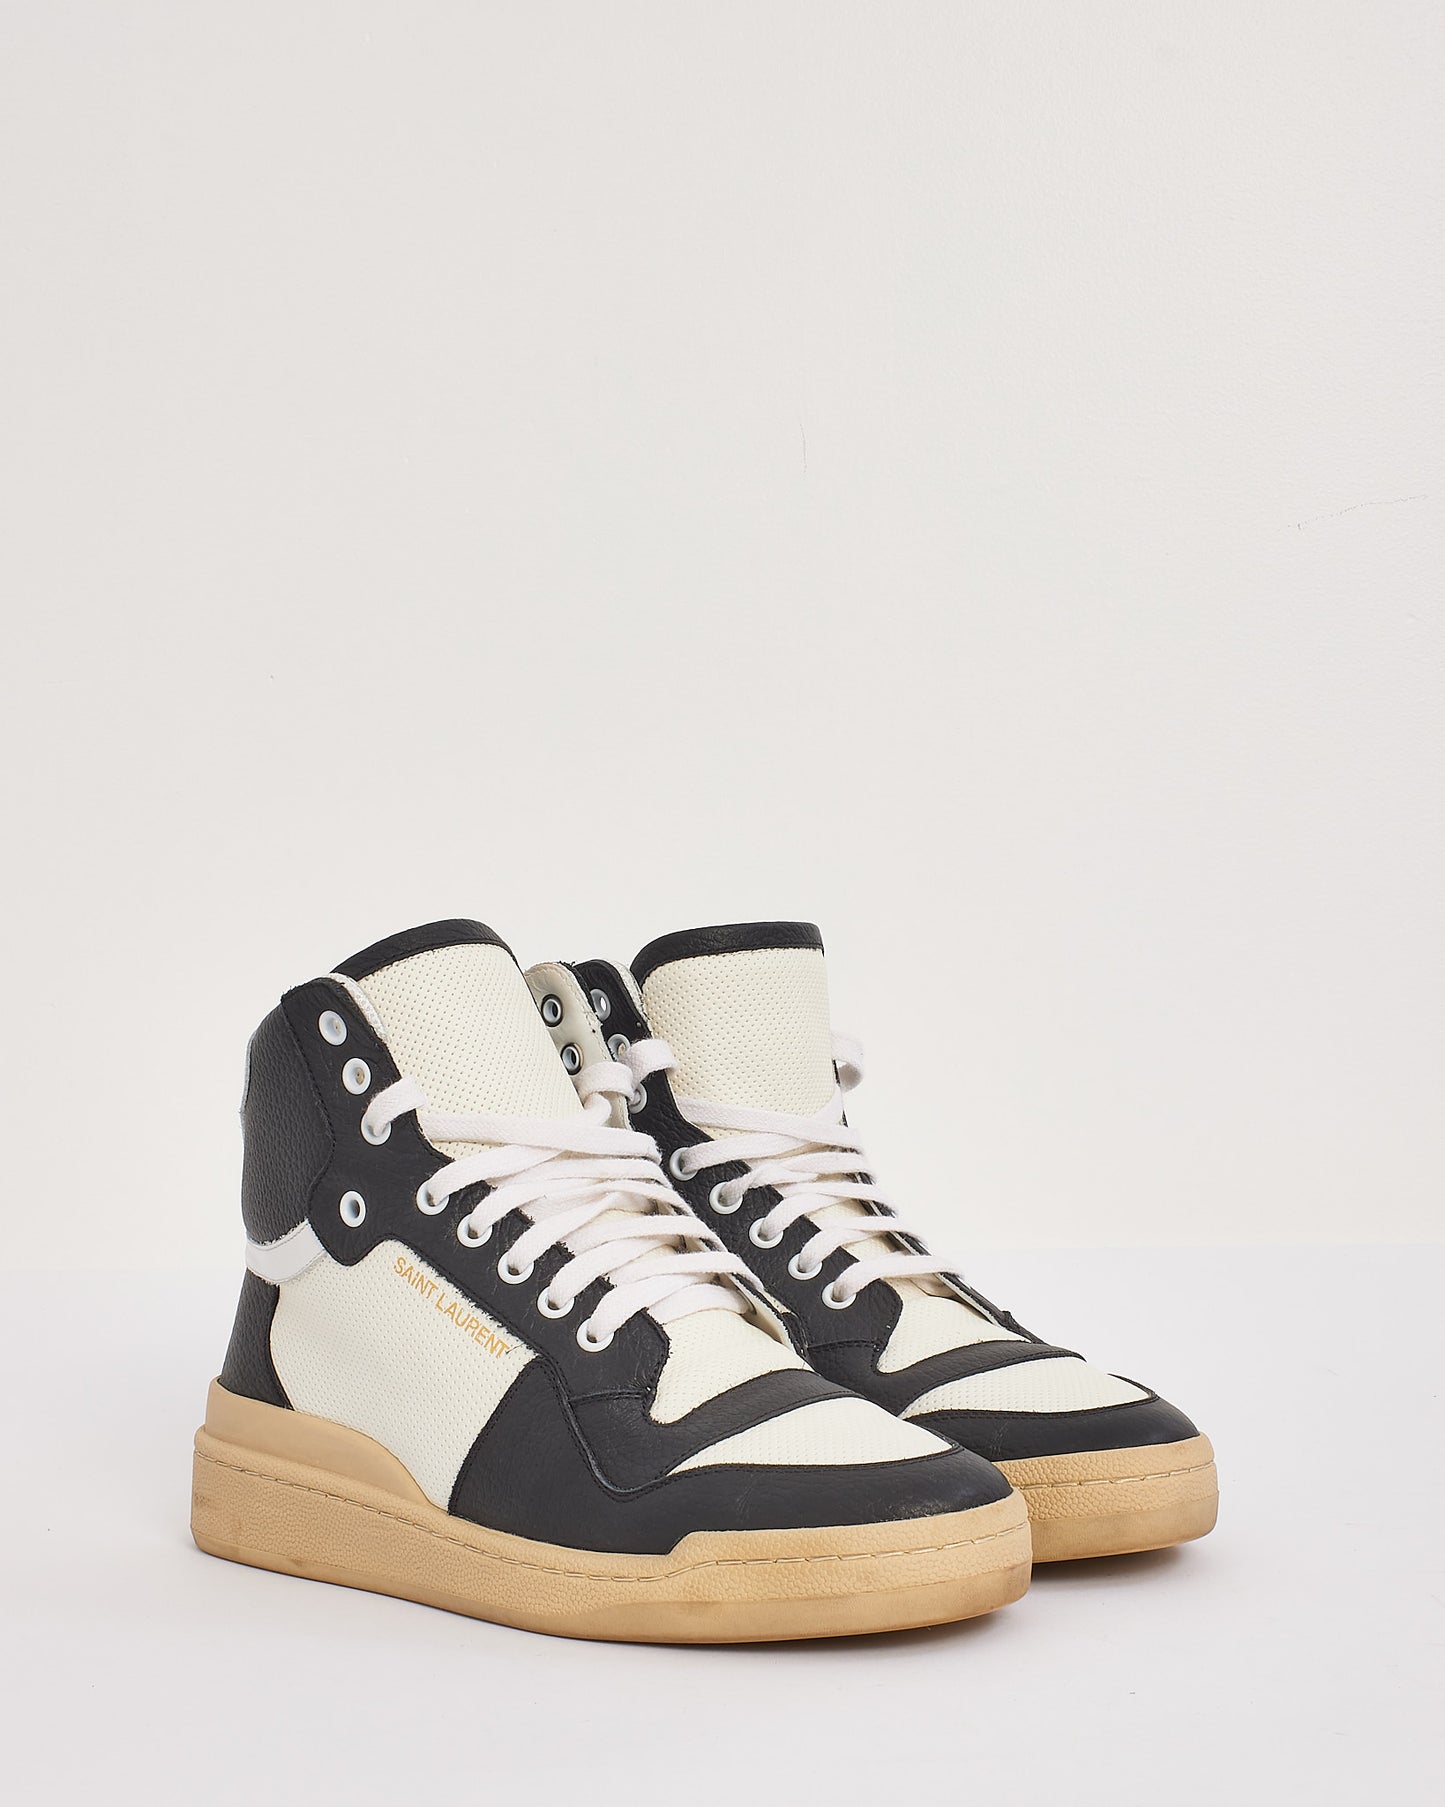 Saint Laurent White Leather Andy Low Top Sneakers - 40